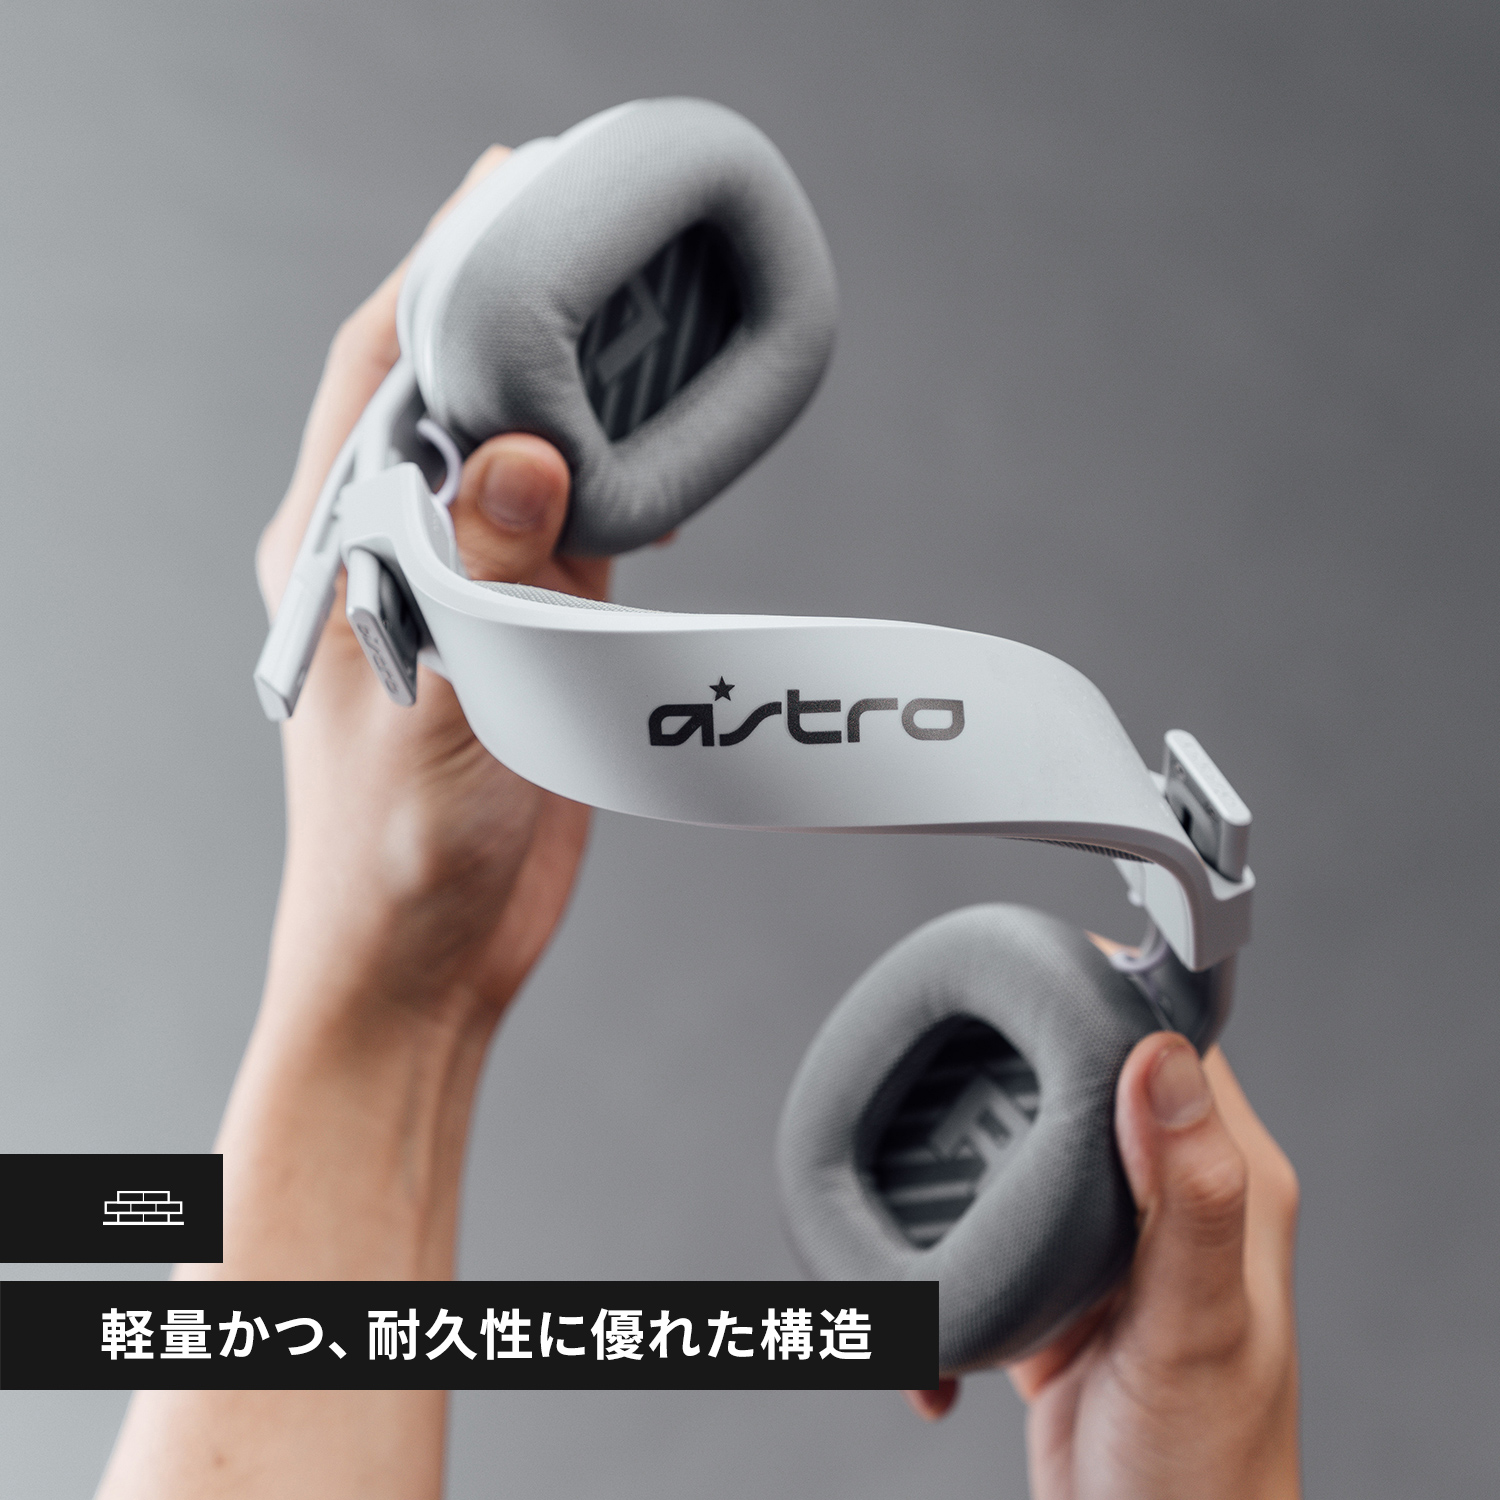 ASTRO Gaming A10 ゲーミングヘッドセット 第2世代 2.1ch 有線 3.5mm PS5 PS4 PC Mac Xbox Switch スマホ A10G2GR A10G2LC A10G2MN A10G2BK A10G2WH 国内正規品 2年間無償保証